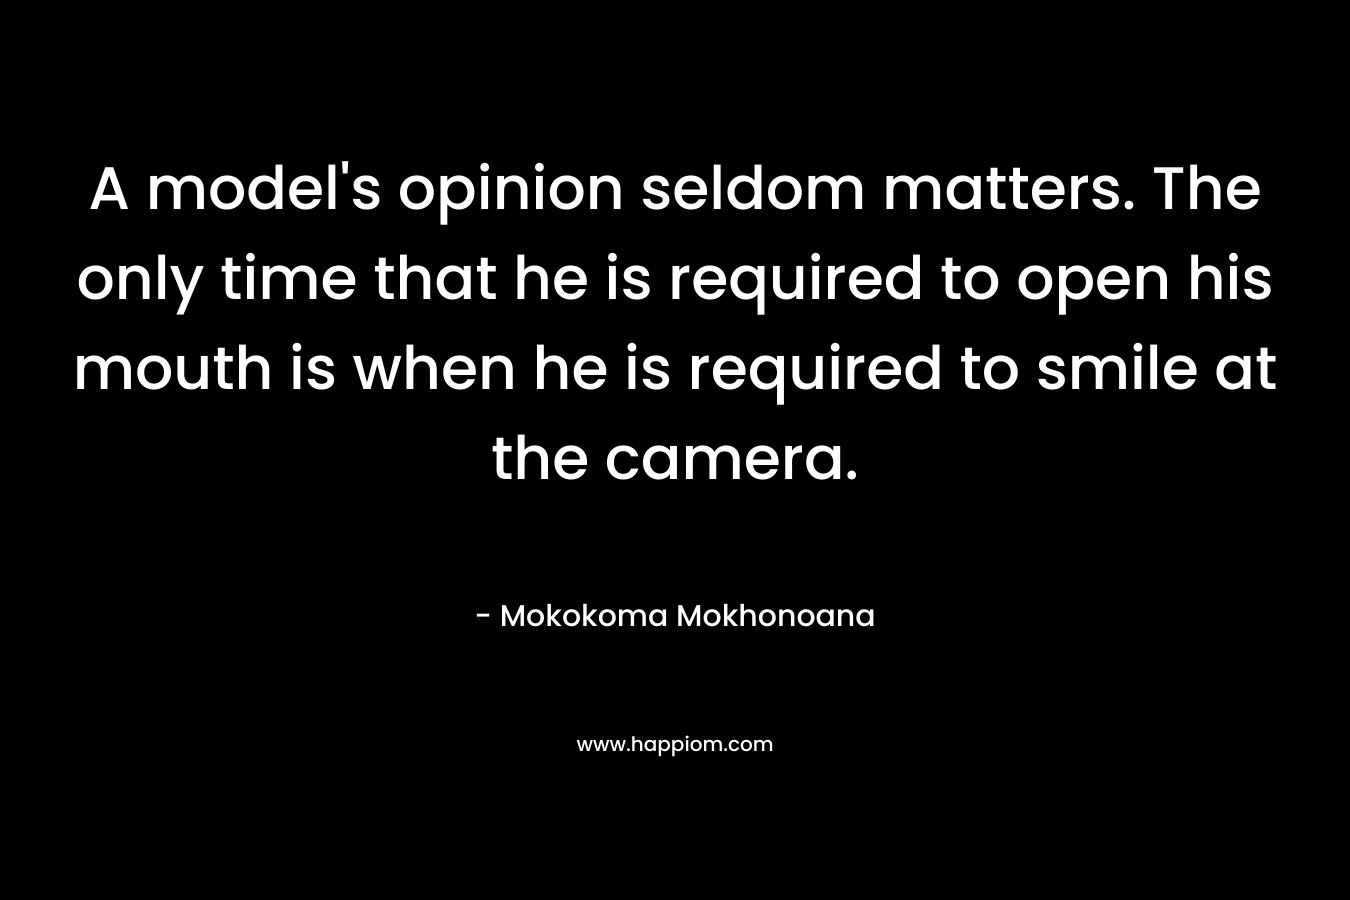 A model's opinion seldom matters. The only time that he is required to open his mouth is when he is required to smile at the camera.